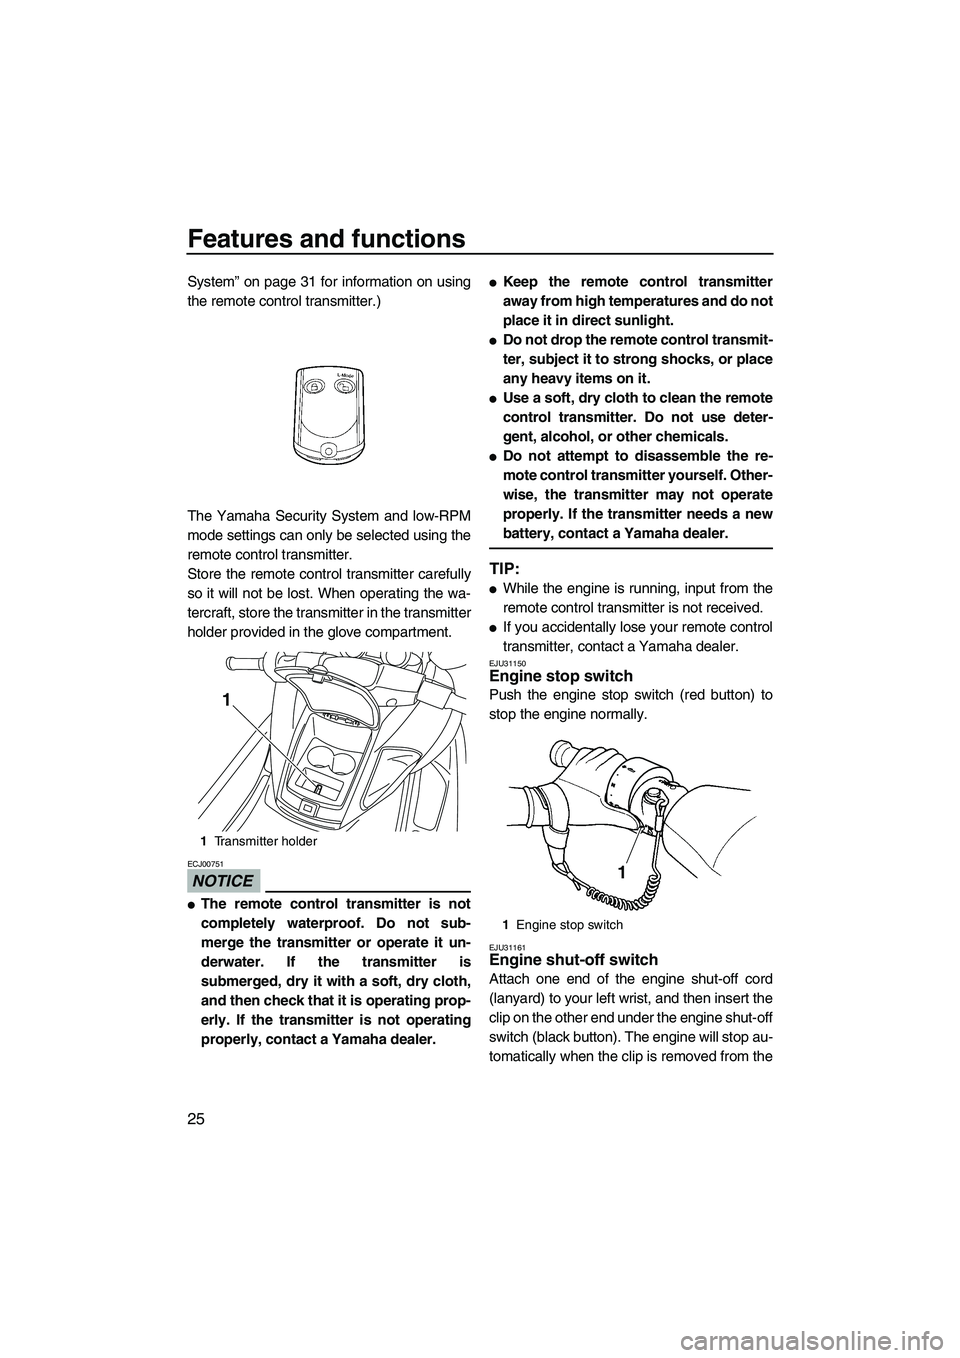 YAMAHA FZR SVHO 2009 Owners Guide Features and functions
25
System” on page 31 for information on using
the remote control transmitter.)
The Yamaha Security System and low-RPM
mode settings can only be selected using the
remote cont